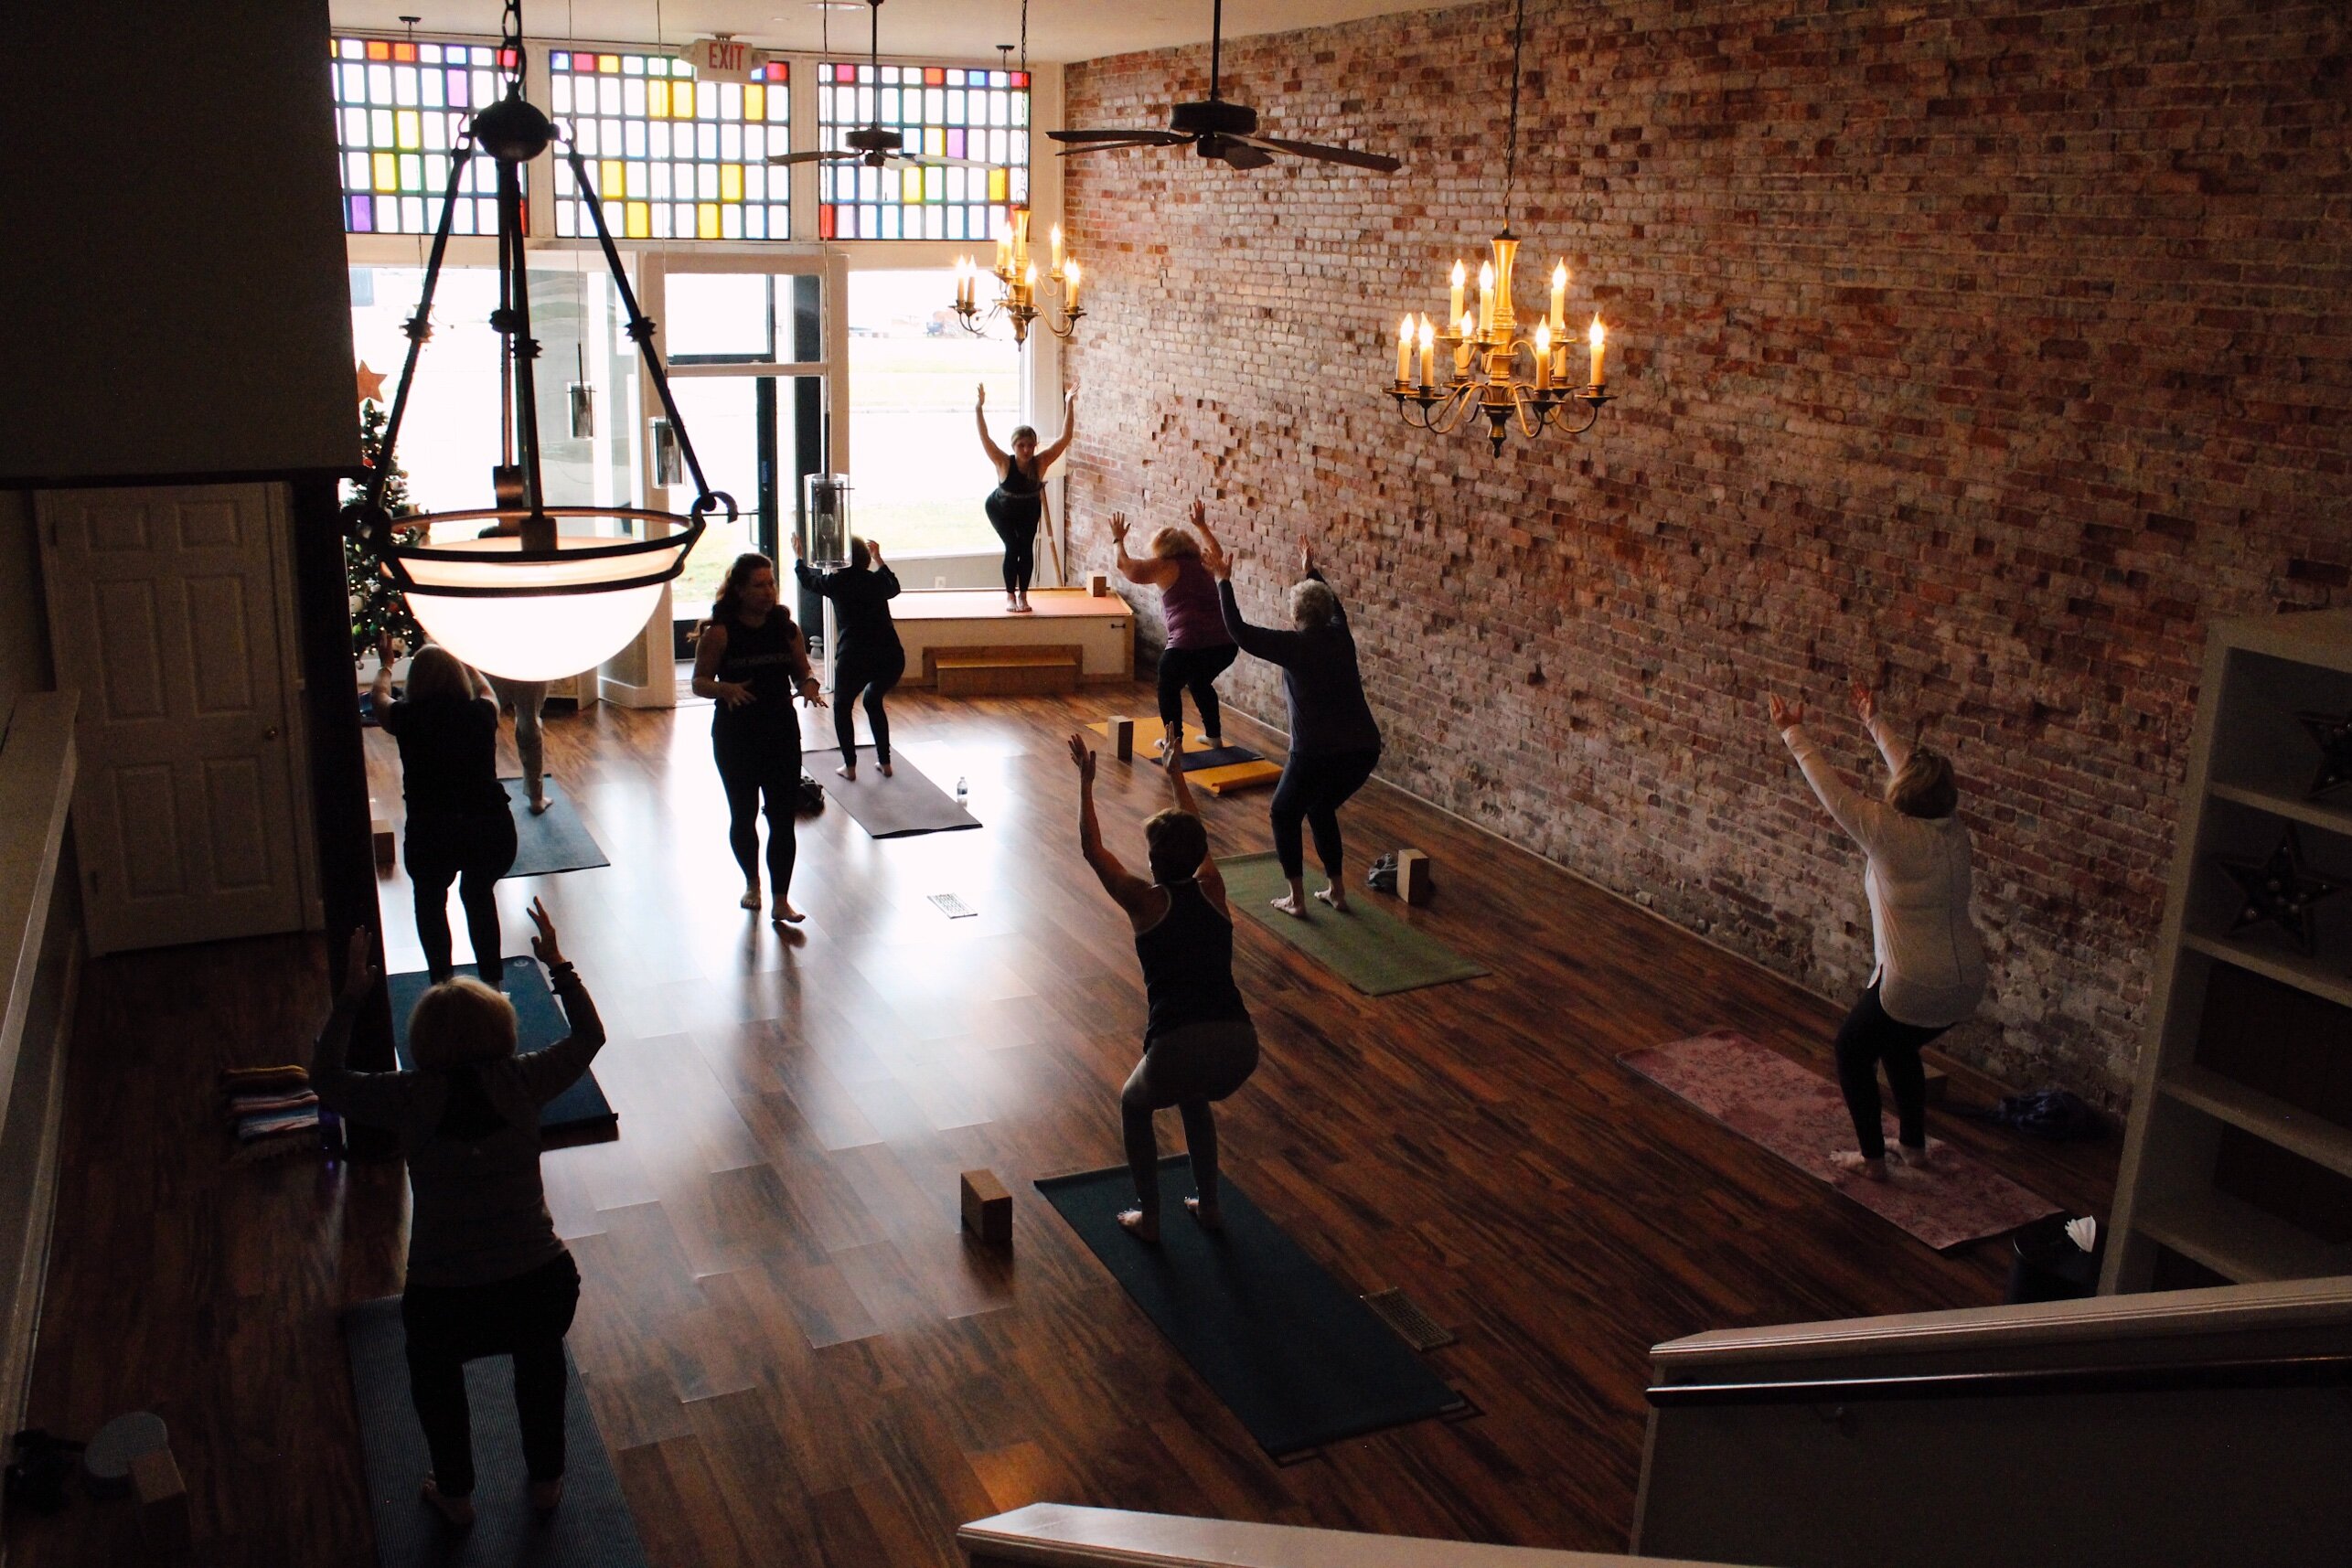 A scene from Port Huron Yoga, an early client for the new Downtown Imaging Co.